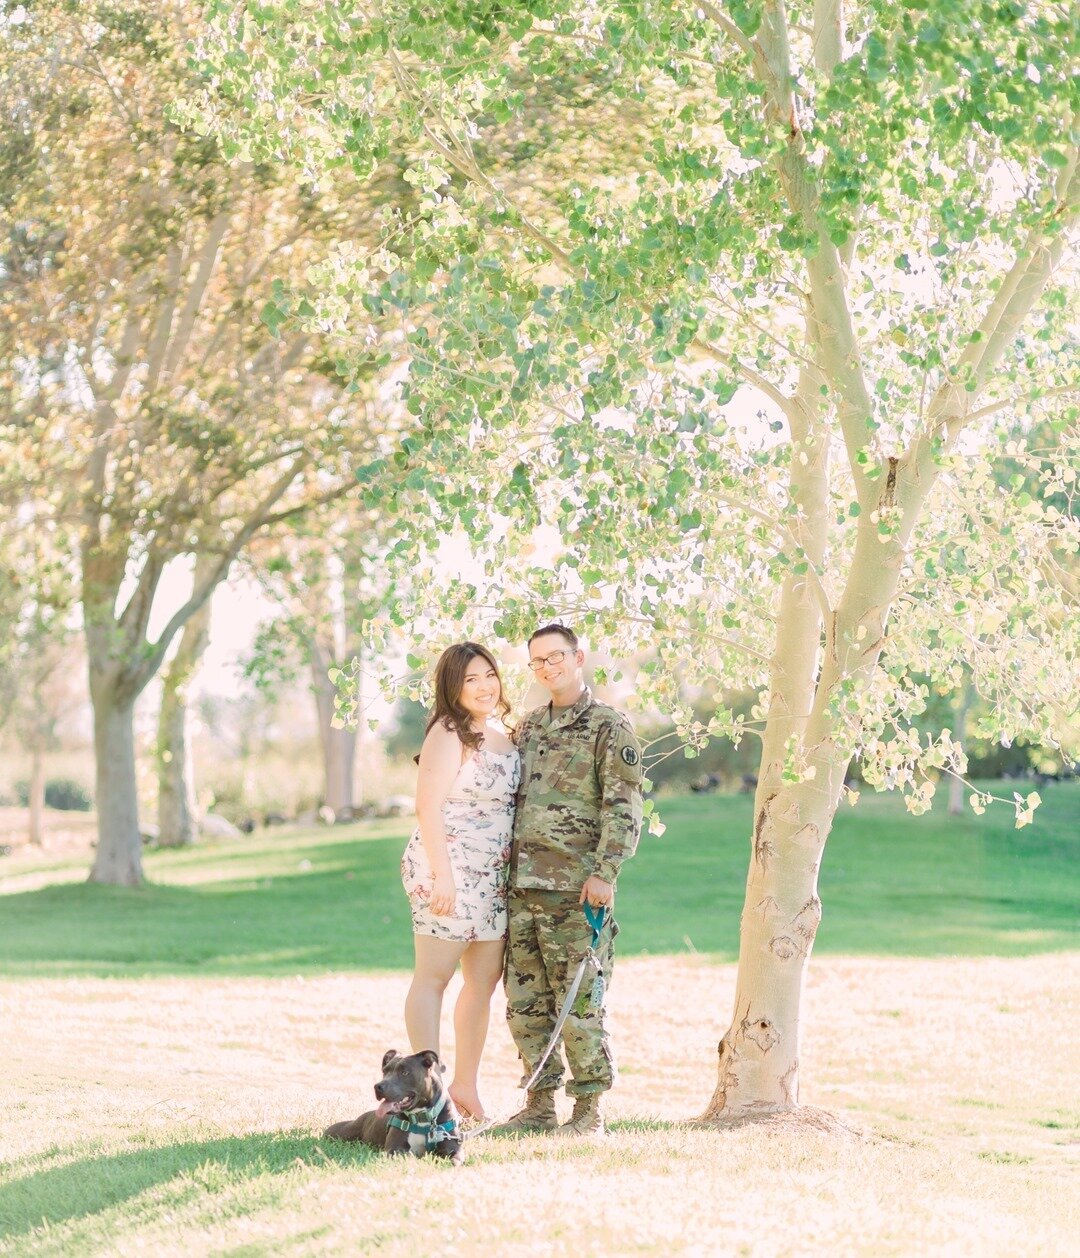 Sneak peek alert!  ⠀⠀⠀⠀⠀⠀⠀⠀⠀
⠀⠀⠀⠀⠀⠀⠀⠀⠀
Corrina, Aaron, and their pup Isla had a perfect engagement session yesterday complete with the cutest picnic setup by @eileen.entertainment ... will post more pics soon!   ⠀⠀⠀⠀⠀⠀⠀⠀⠀
⠀⠀⠀⠀⠀⠀⠀⠀⠀
Photos: @aly